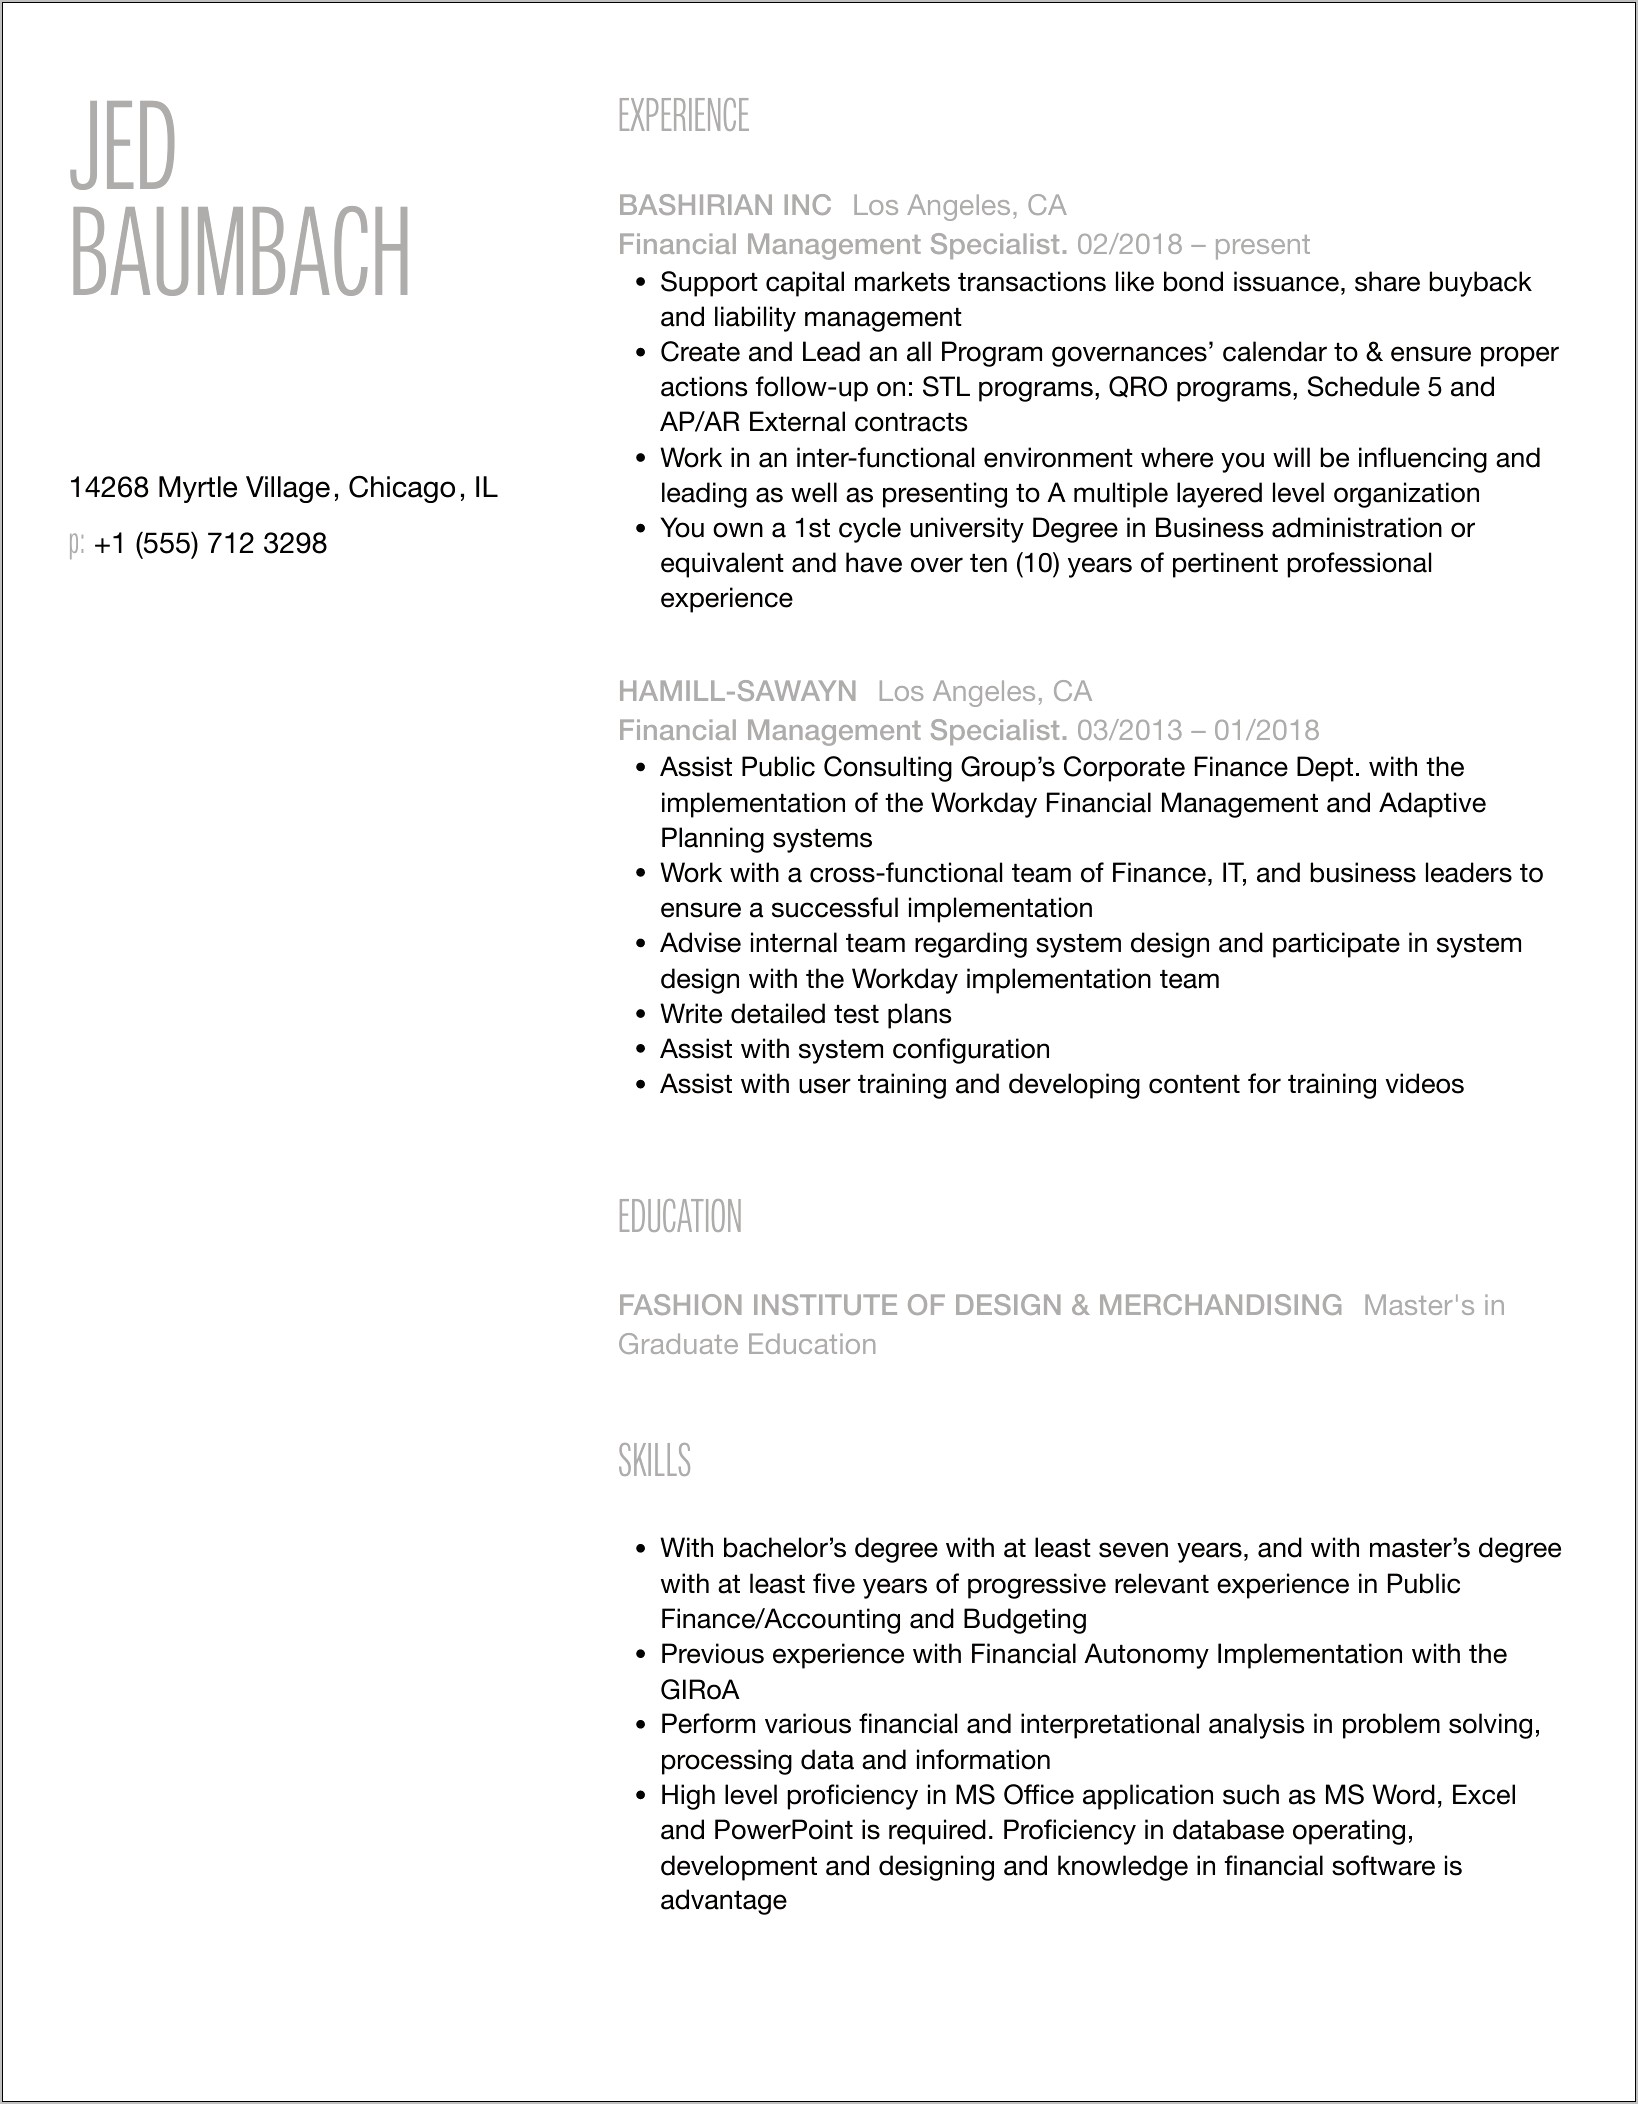 Supervisory Financial Management Specialist Resume